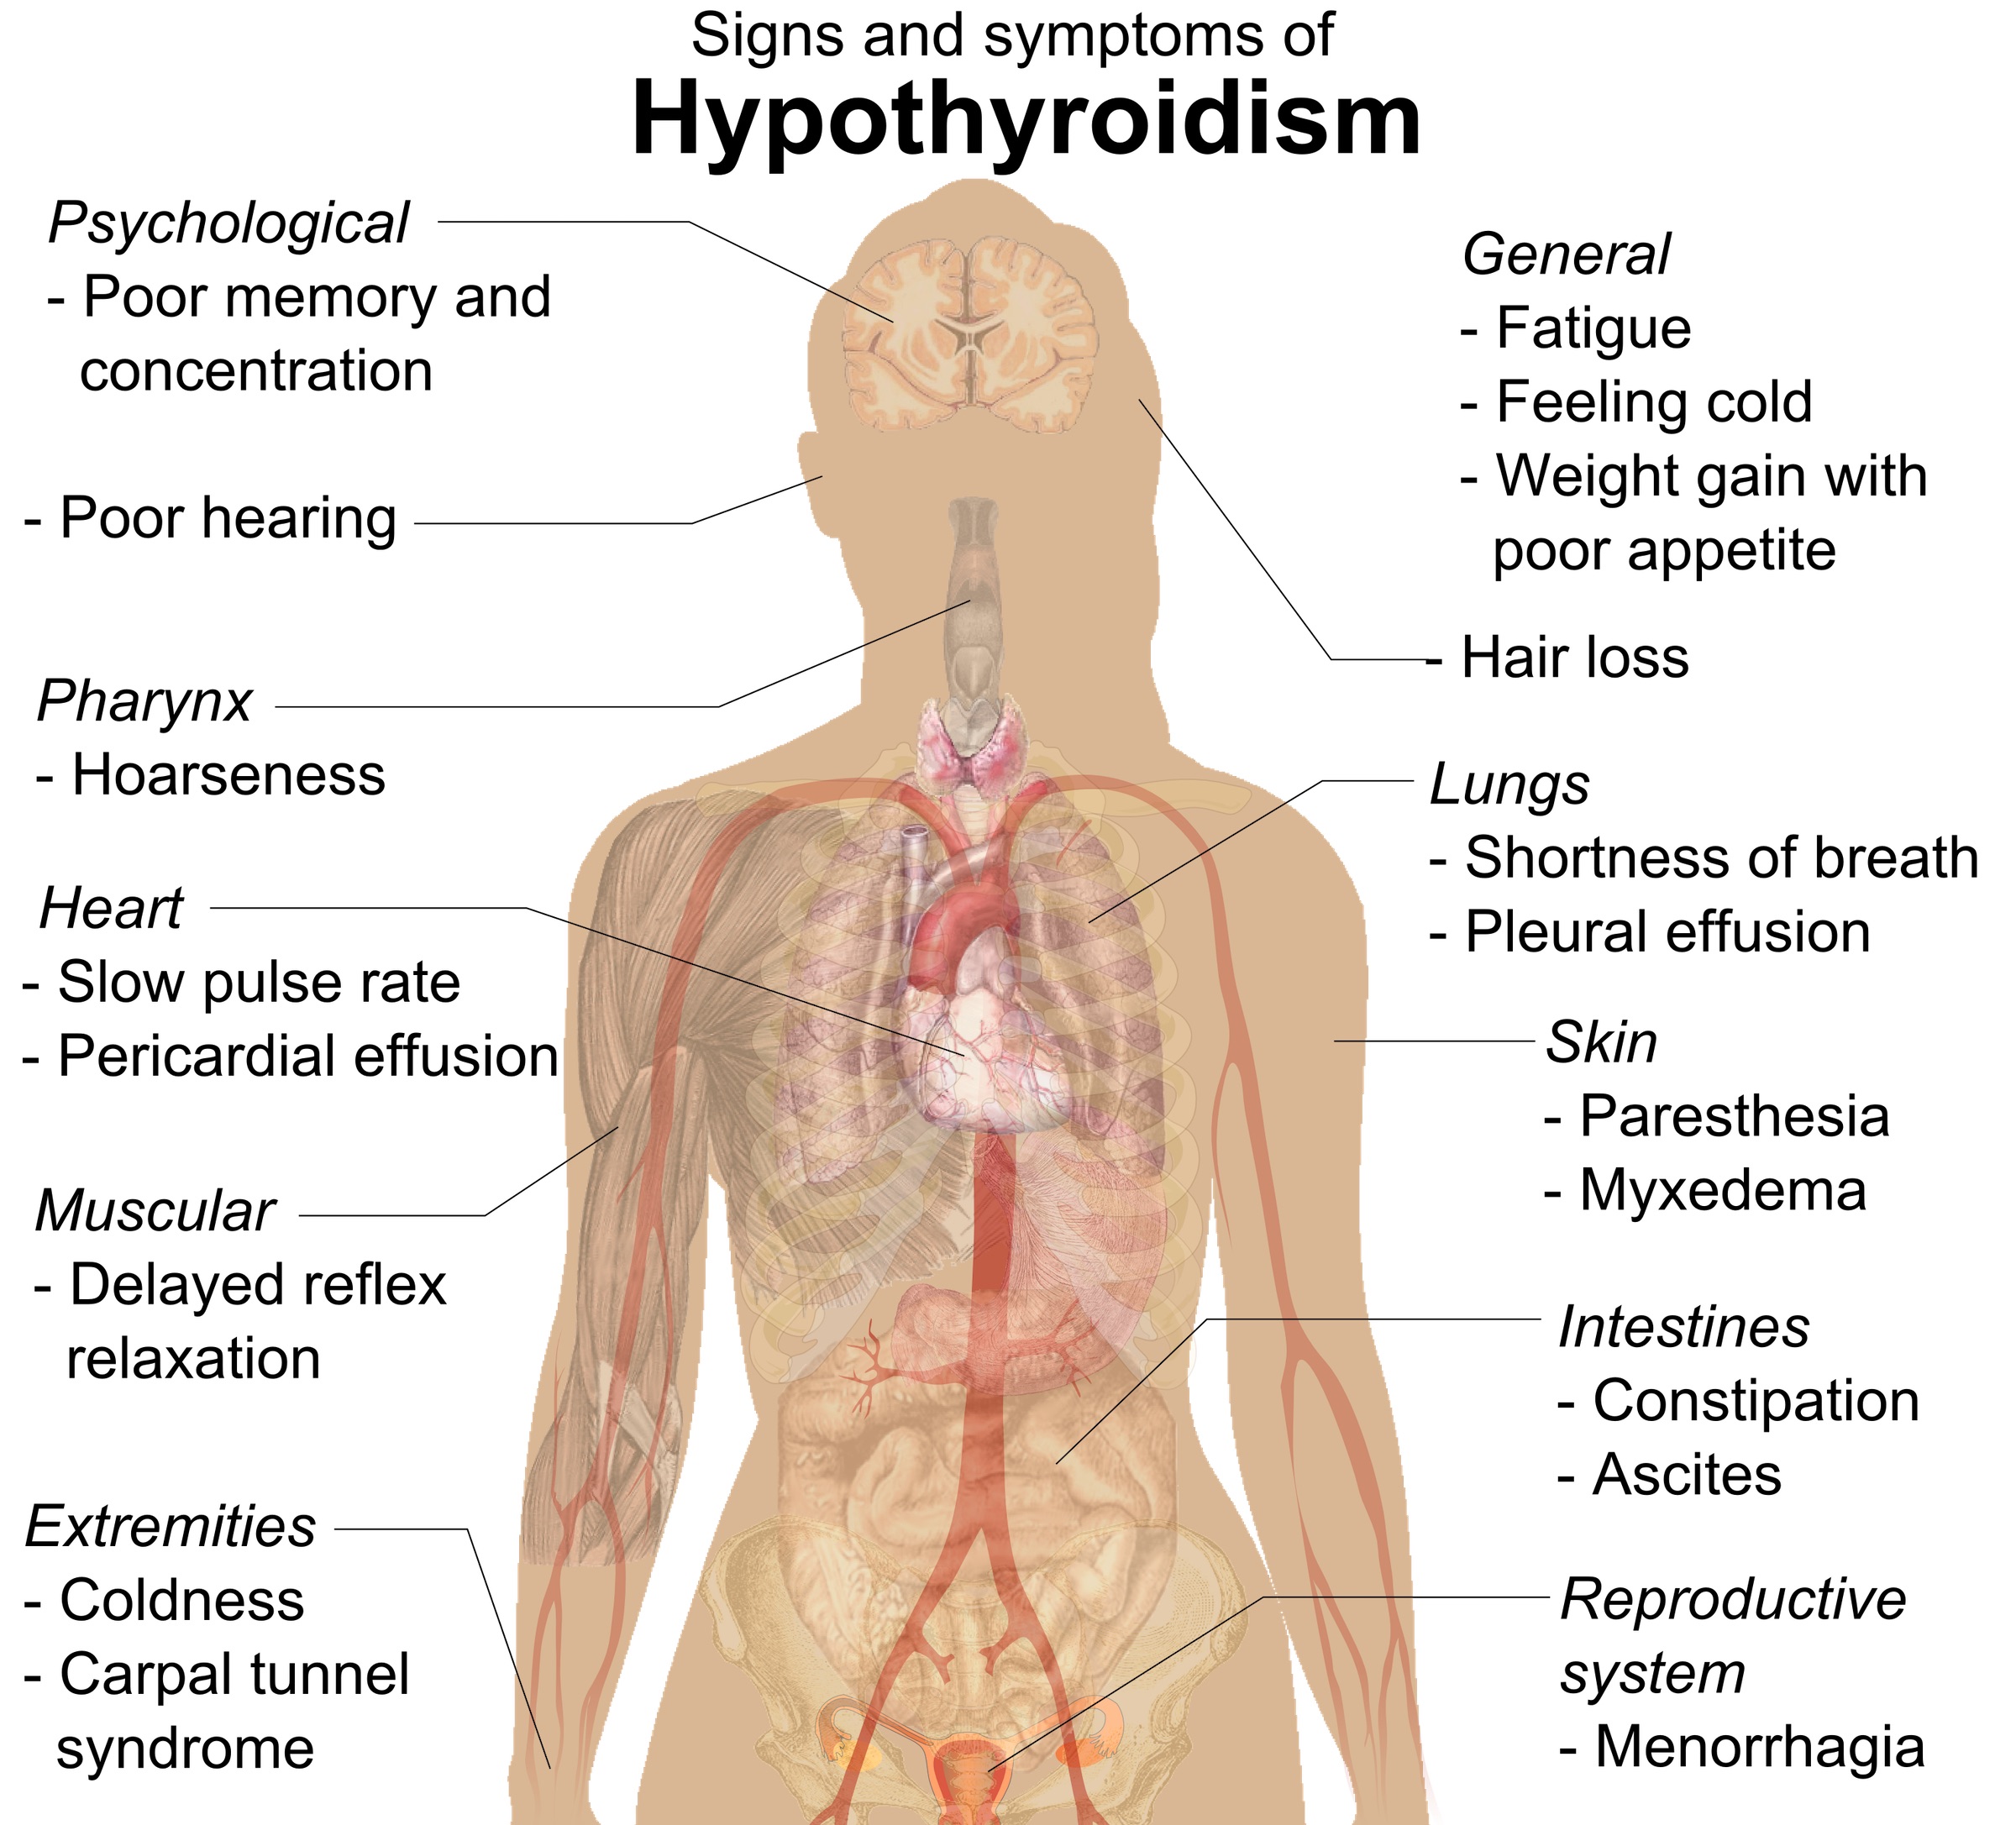 Signs_and_symptoms_of_hypothyroidism